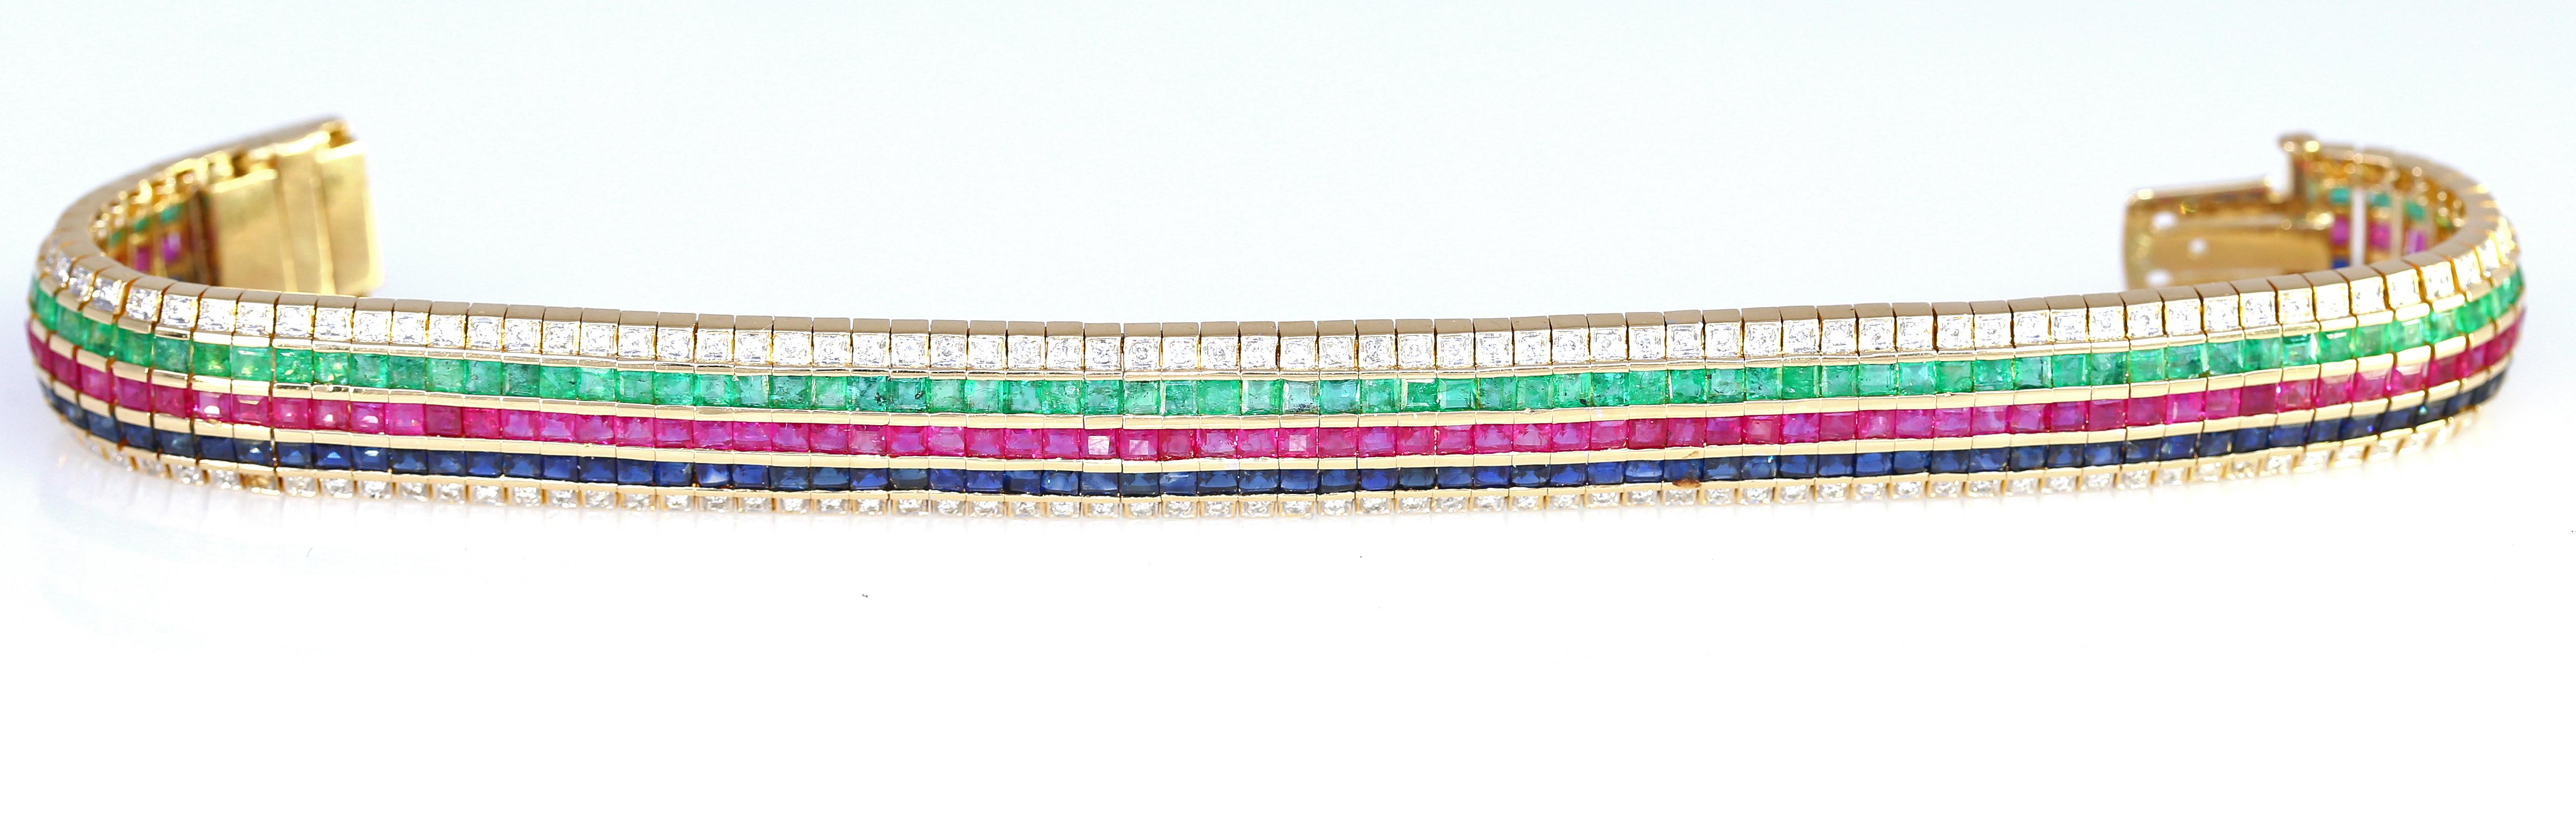 Very flexible, superbly crafted to sit perfectly on a hand. An 18K Yellow Gold Diamond, Ruby, Sapphire and Emerald Bracelet, containing 174 round brilliant cut diamonds weighing approximately 1.74 Ct total, 

87 square step cut rubies measuring